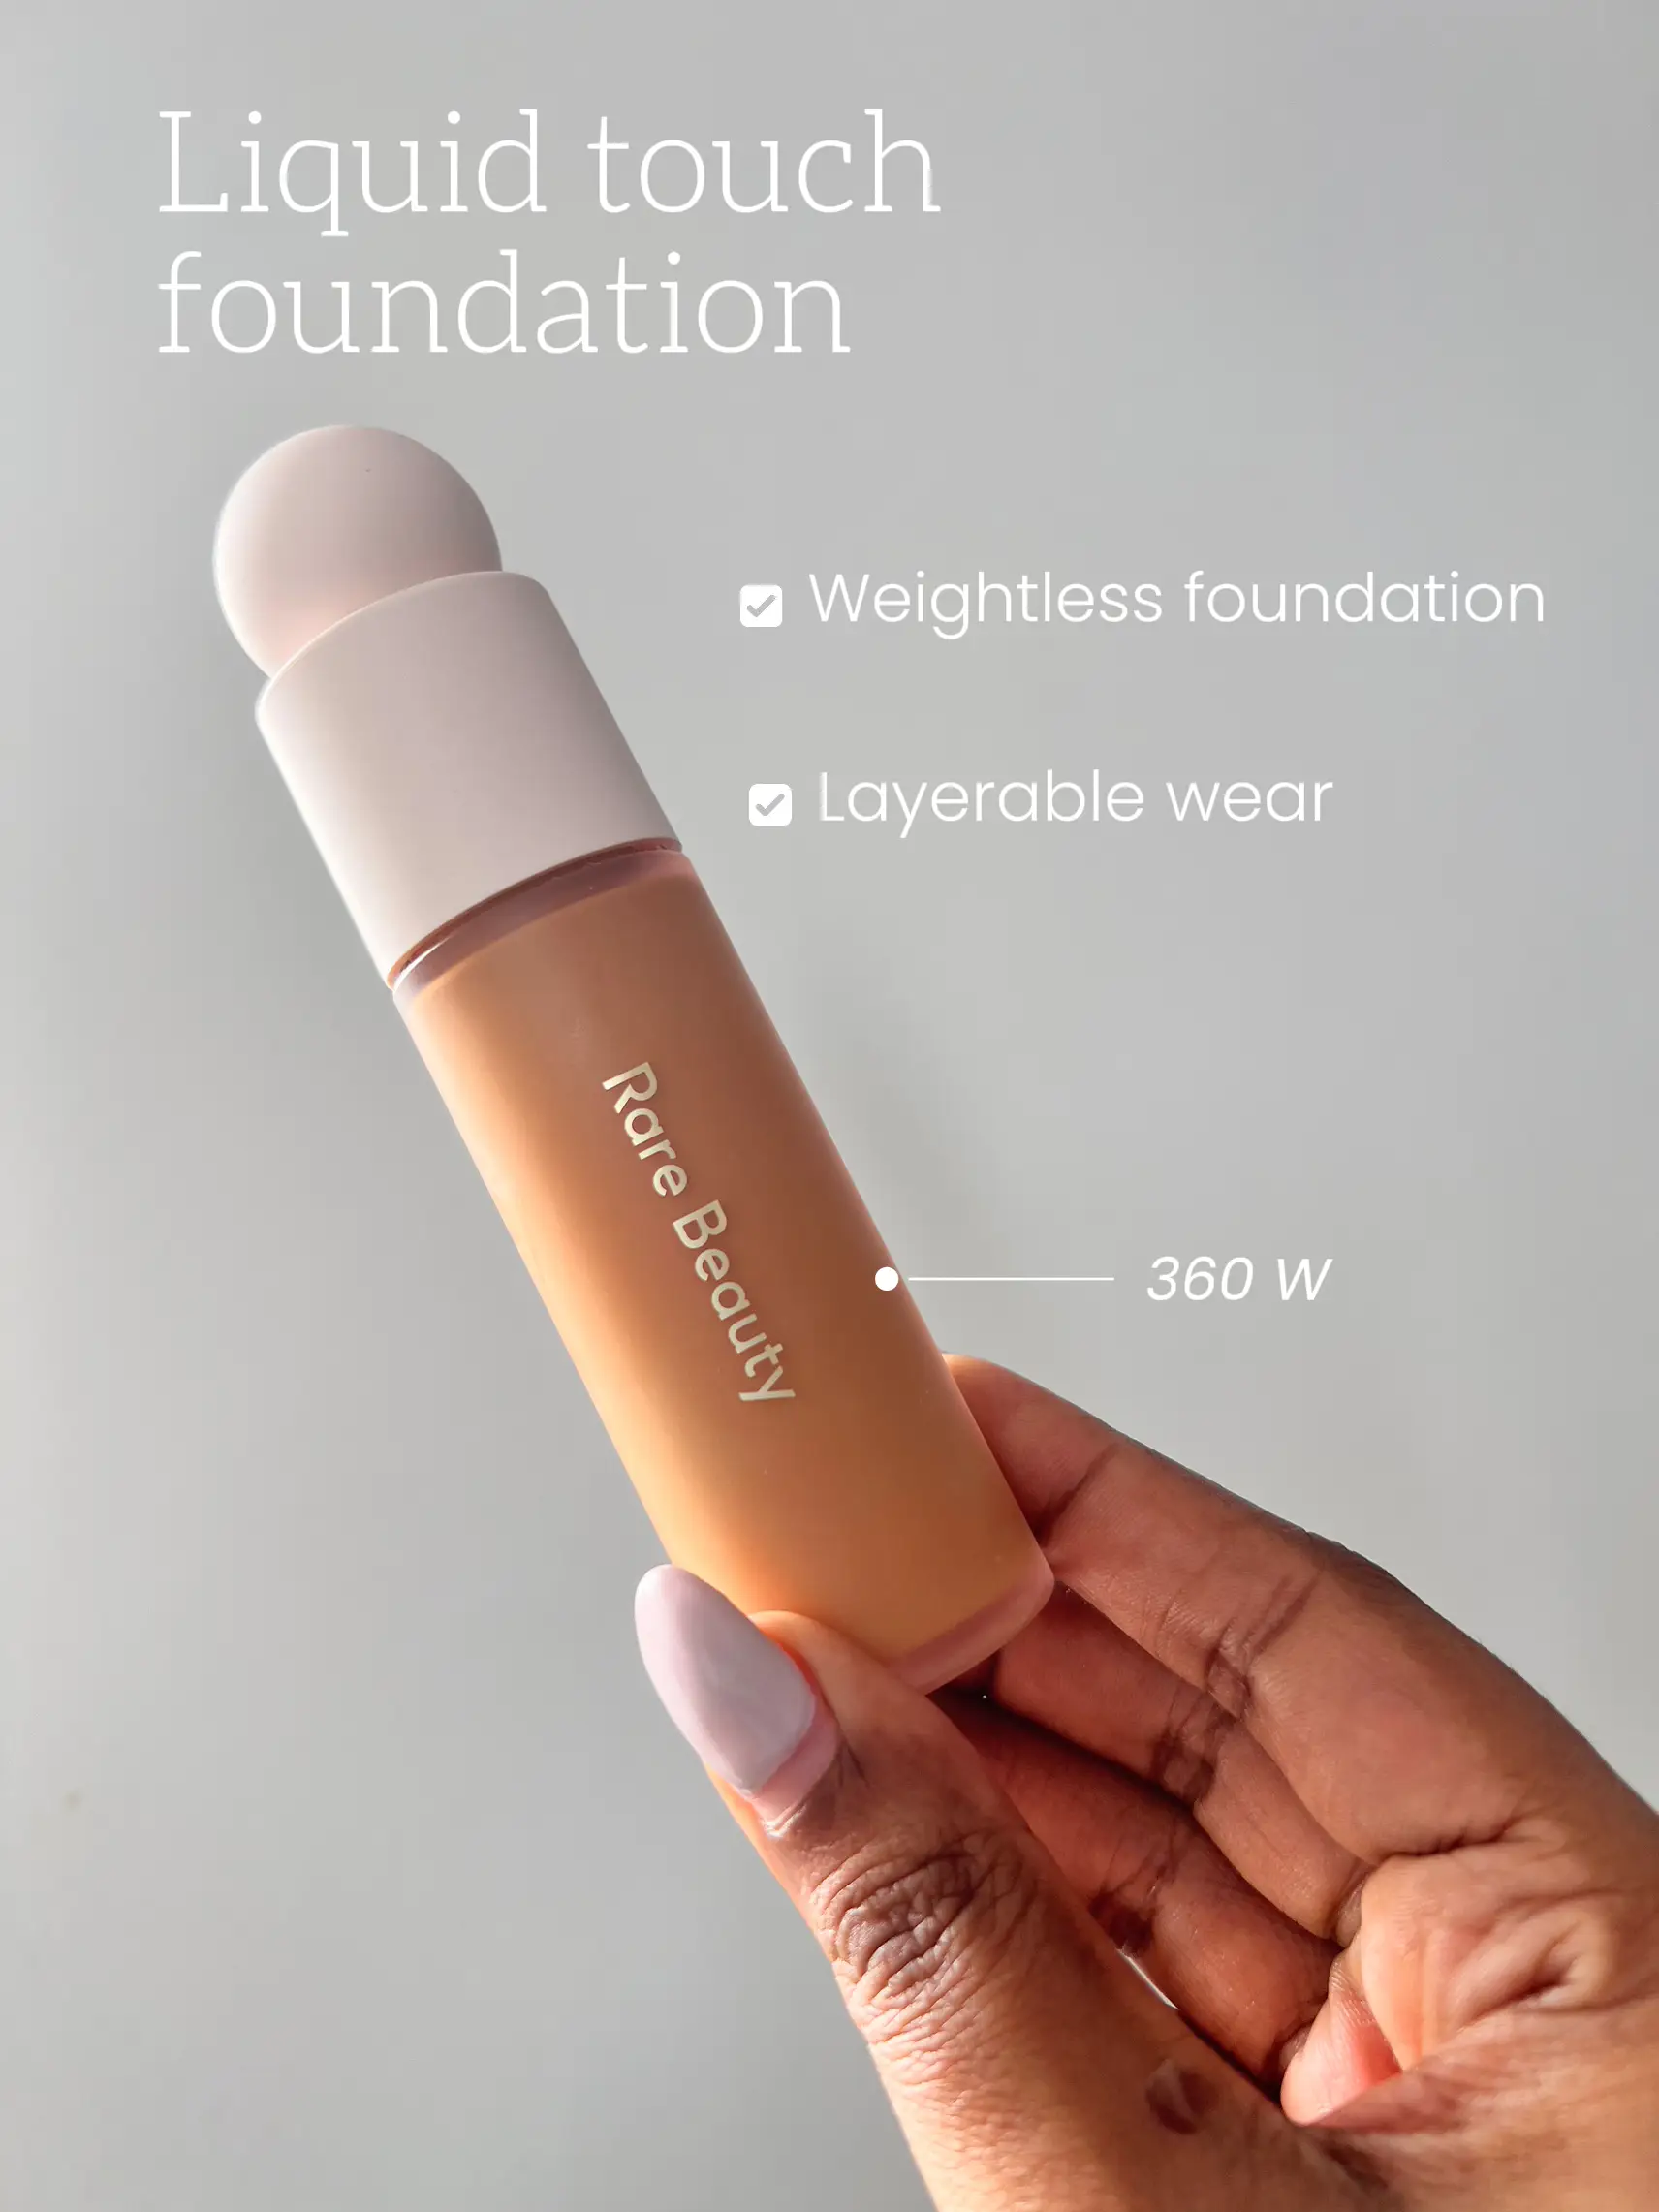 Rare beauty liquid touch foundation is lit 🔥, Gallery posted by Sophie